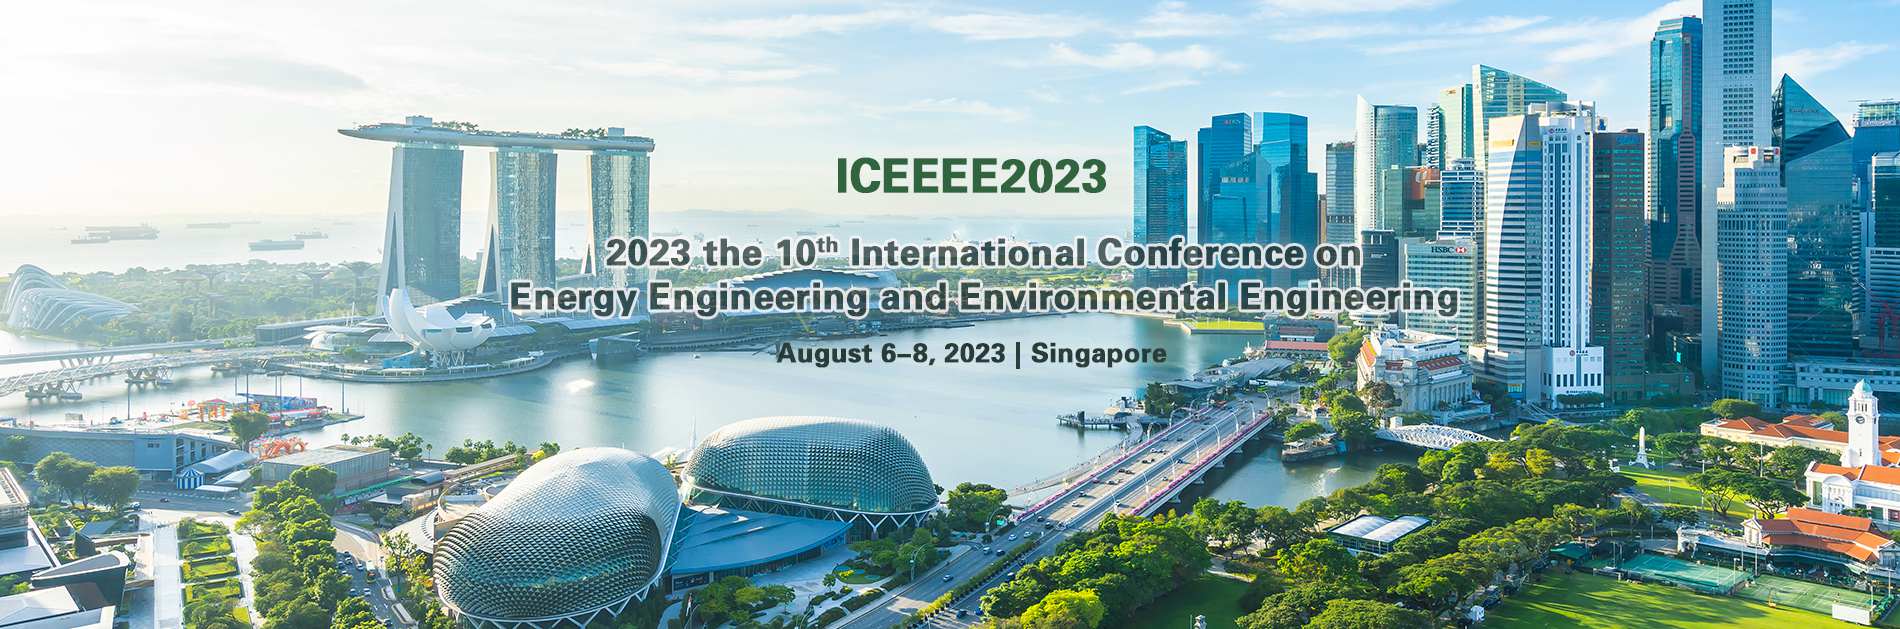 2023 the 10th International Conference on Energy Engineering and Environmental Engineering (ICEEEE2023)